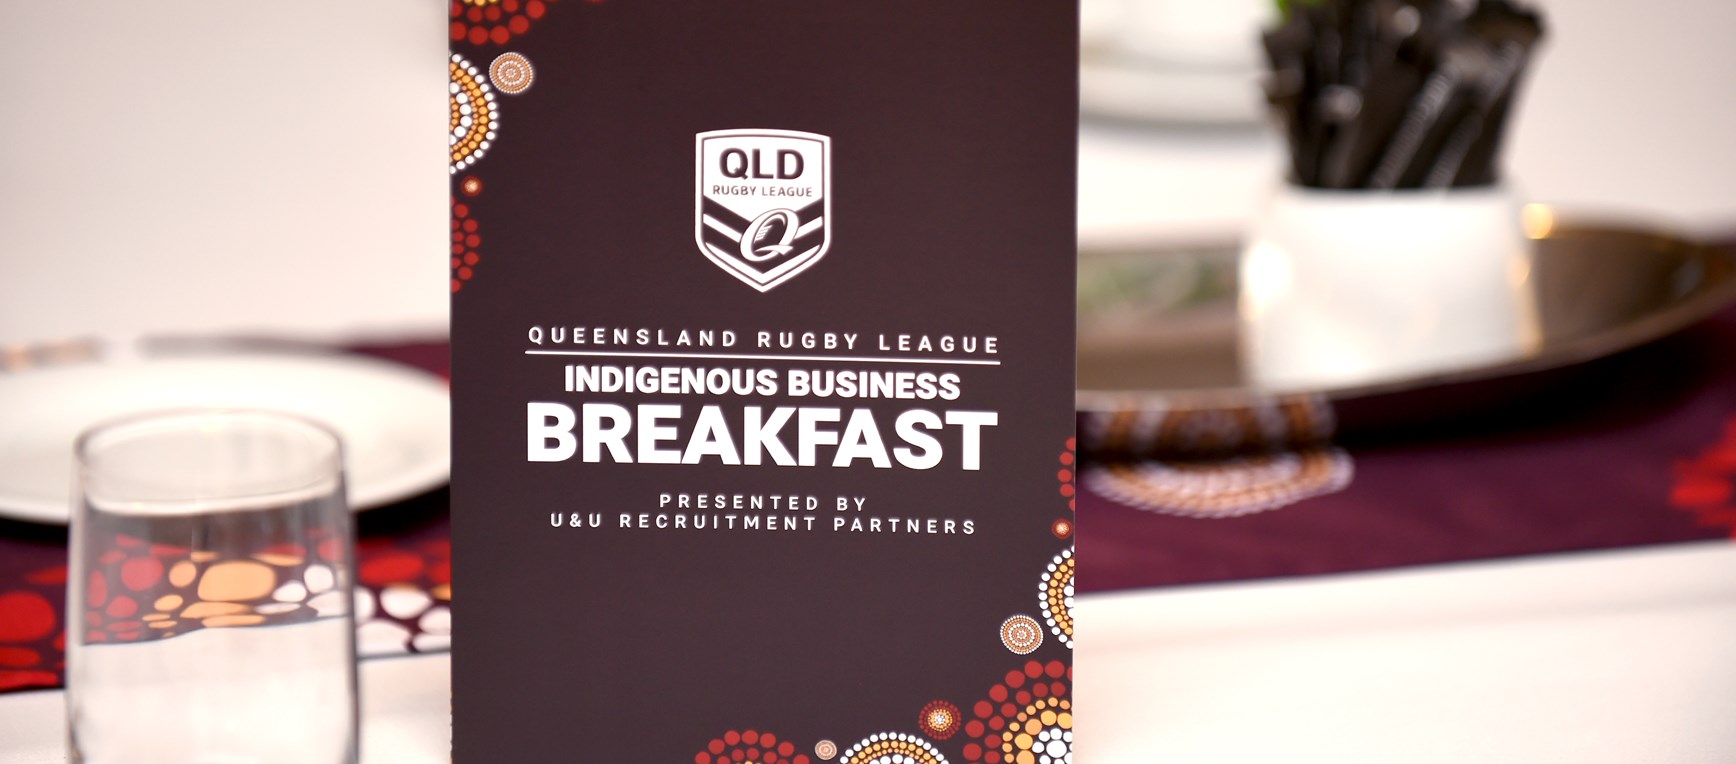 In pictures: QRL Indigenous Breakfast presented by u&u